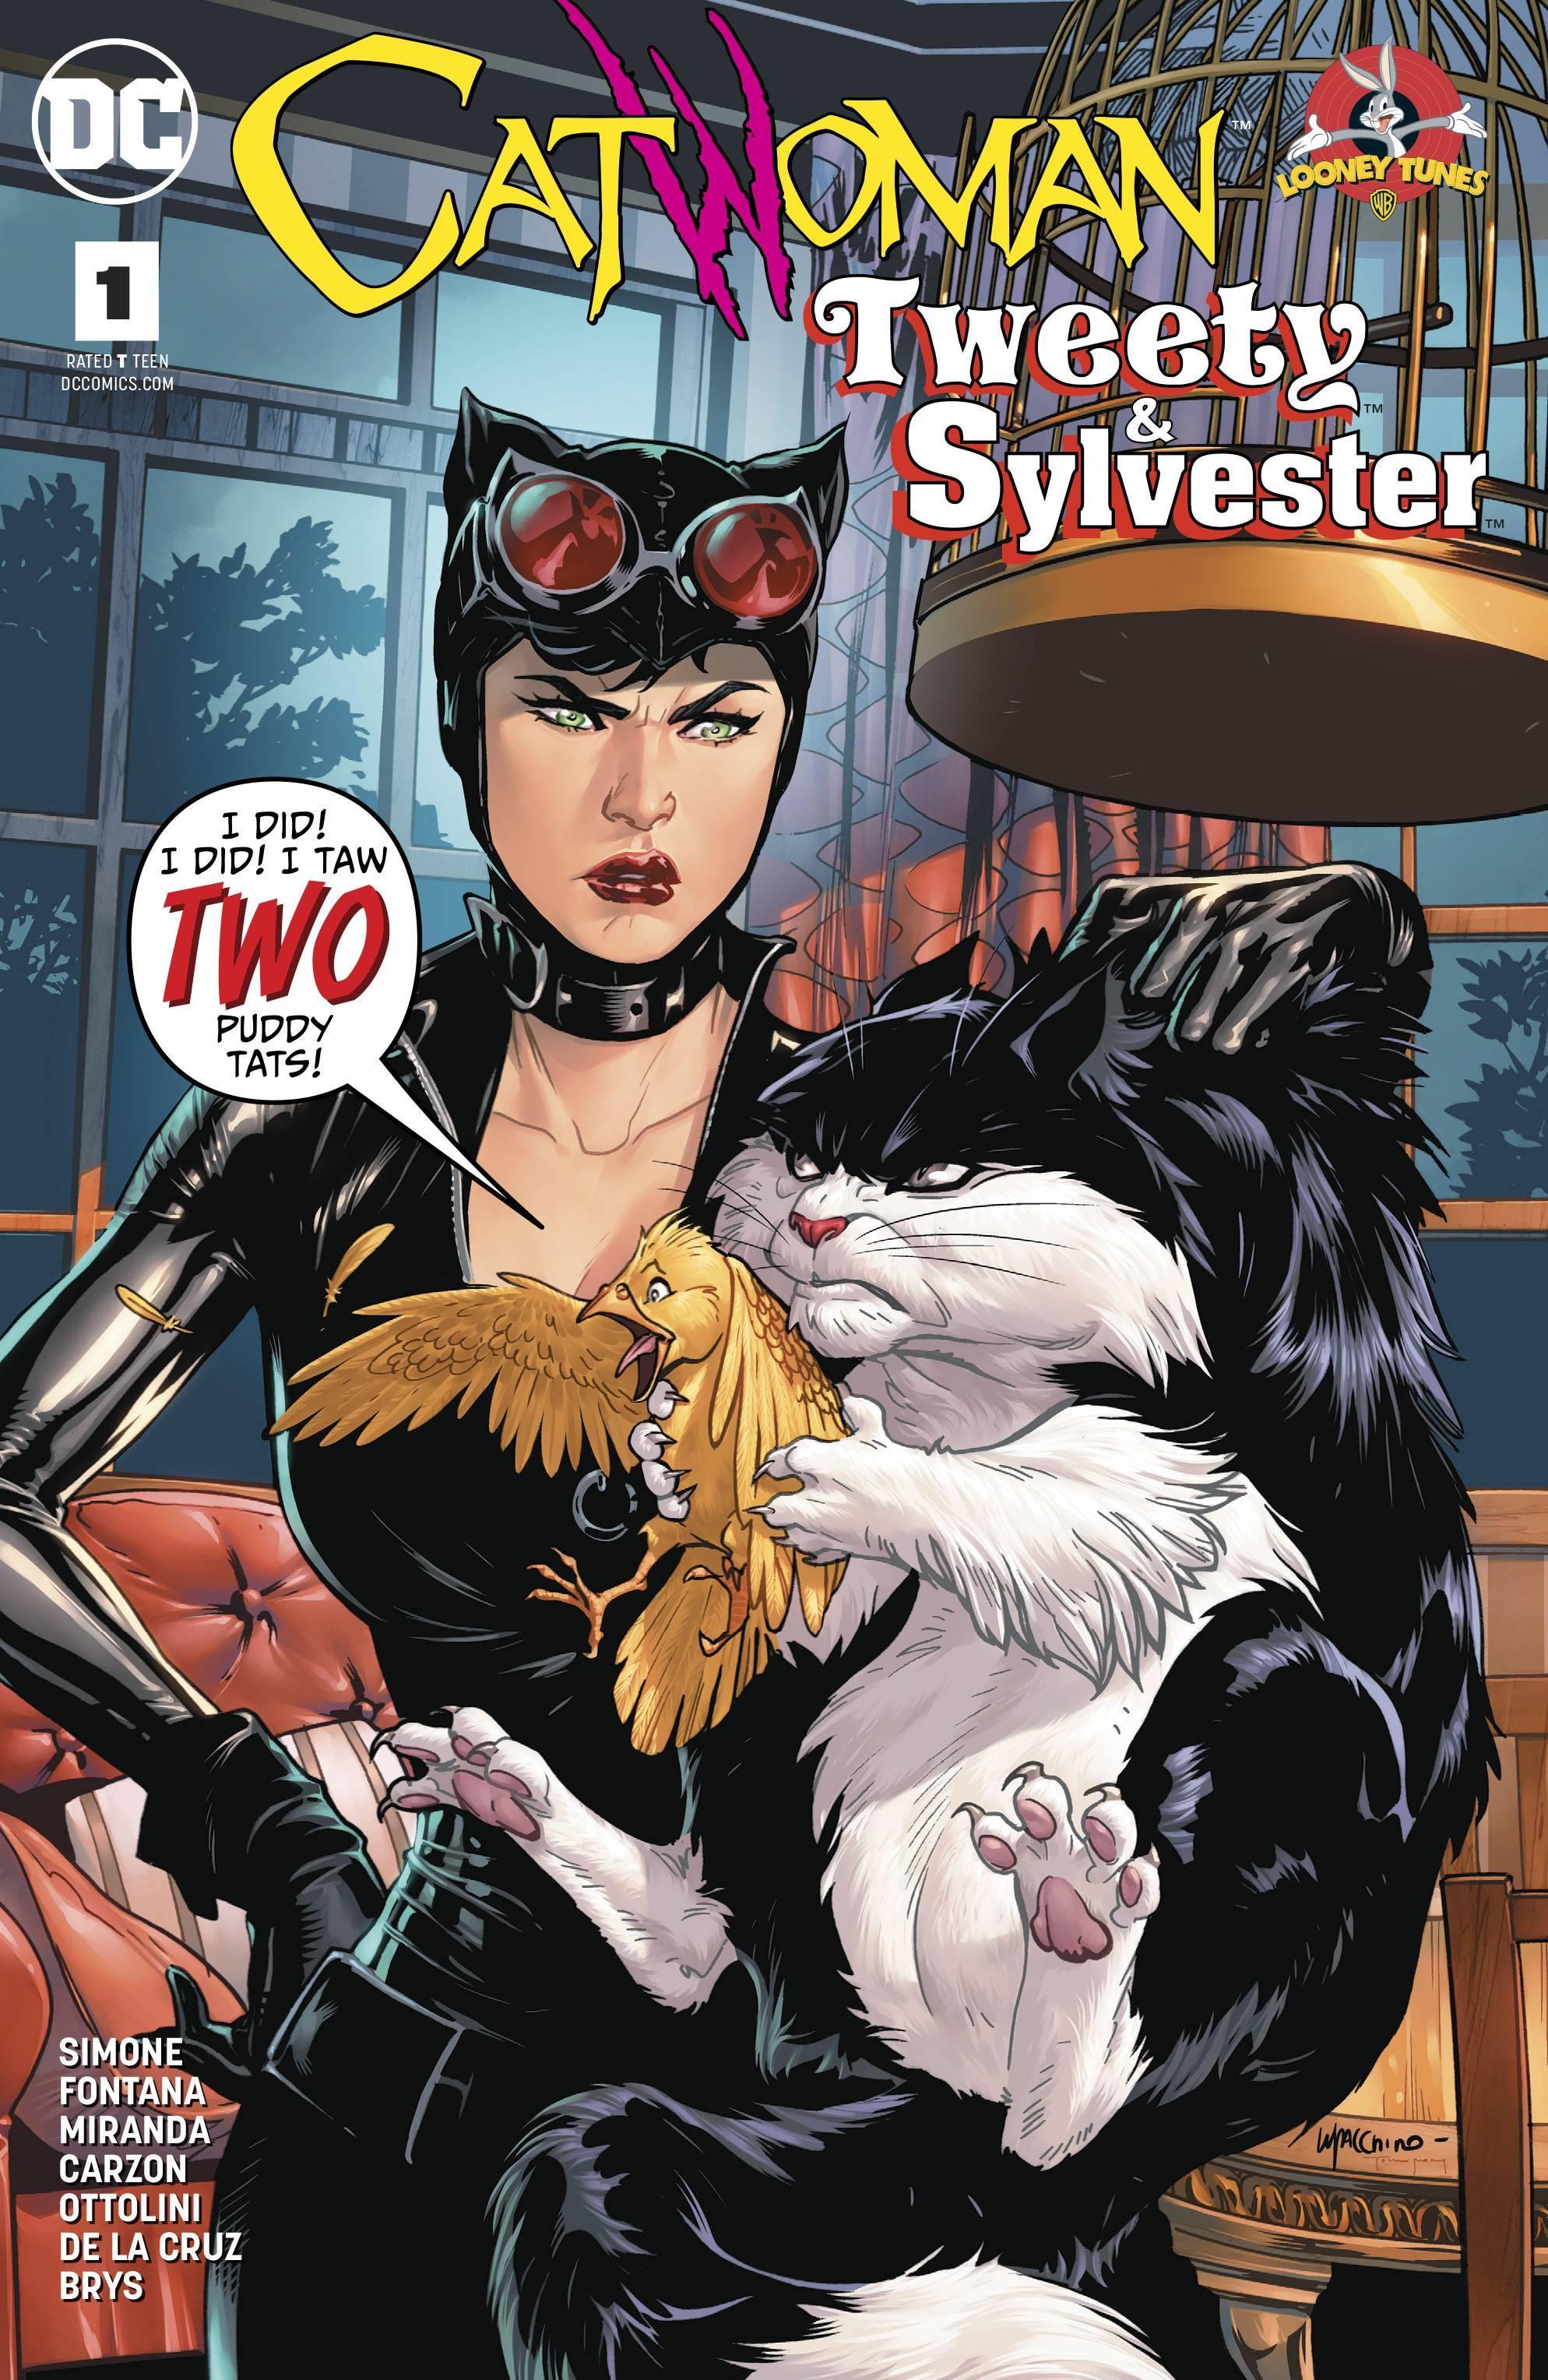 CATWOMAN TWEETY & SYLVESTER SPECIAL #1 - Kings Comics